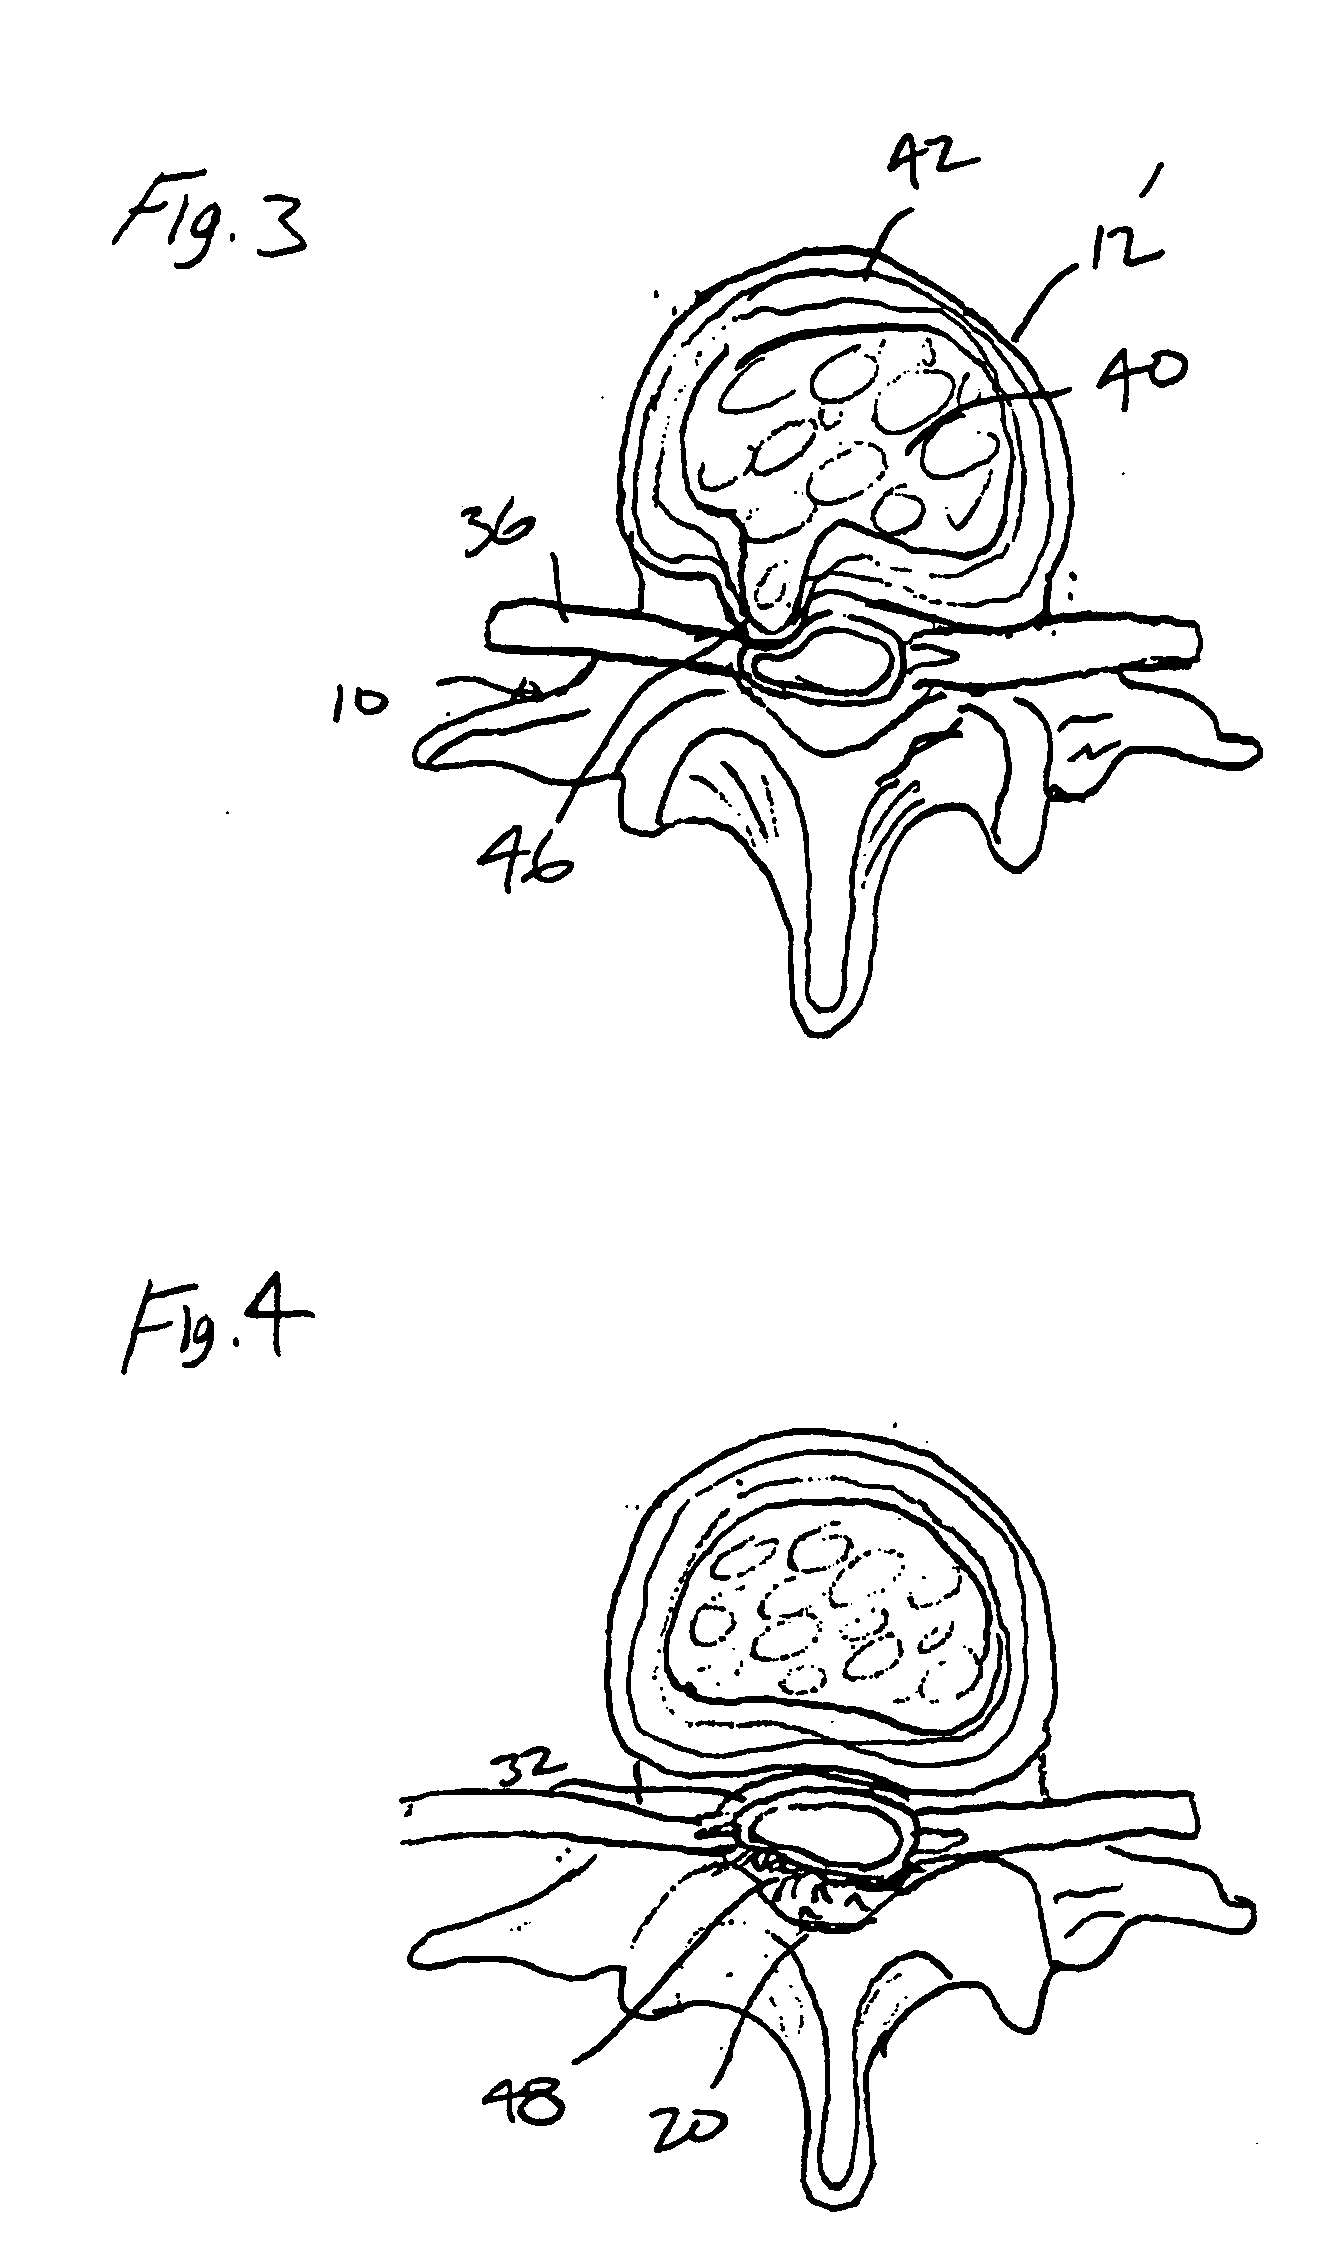 Articulating tissue removal probe and methods of using the same